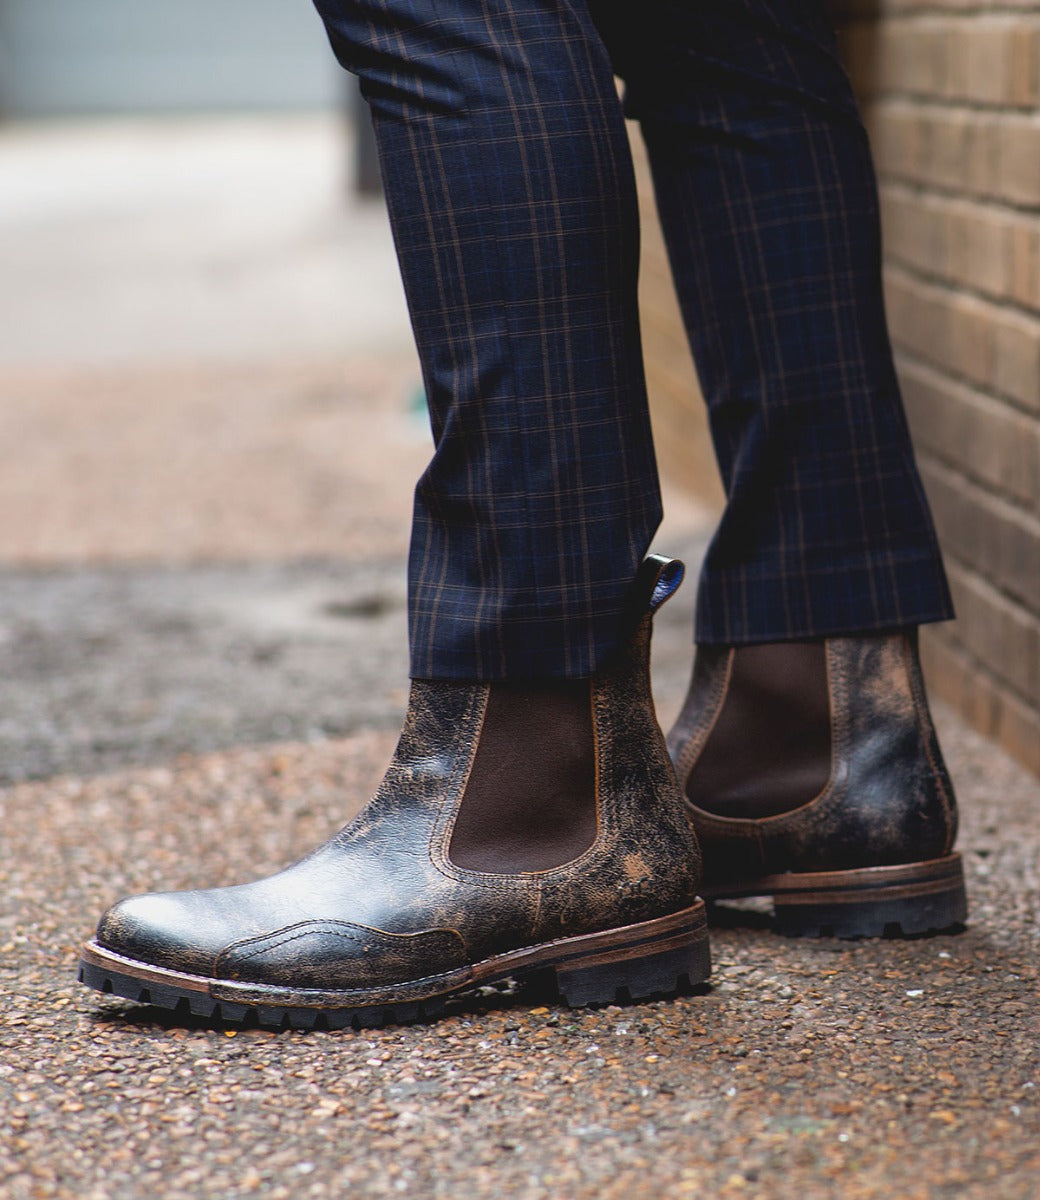 A person wearing Bed Stu Brady Trek boots with a Vibram outsole and plaid trousers standing on a brick-lined sidewalk.